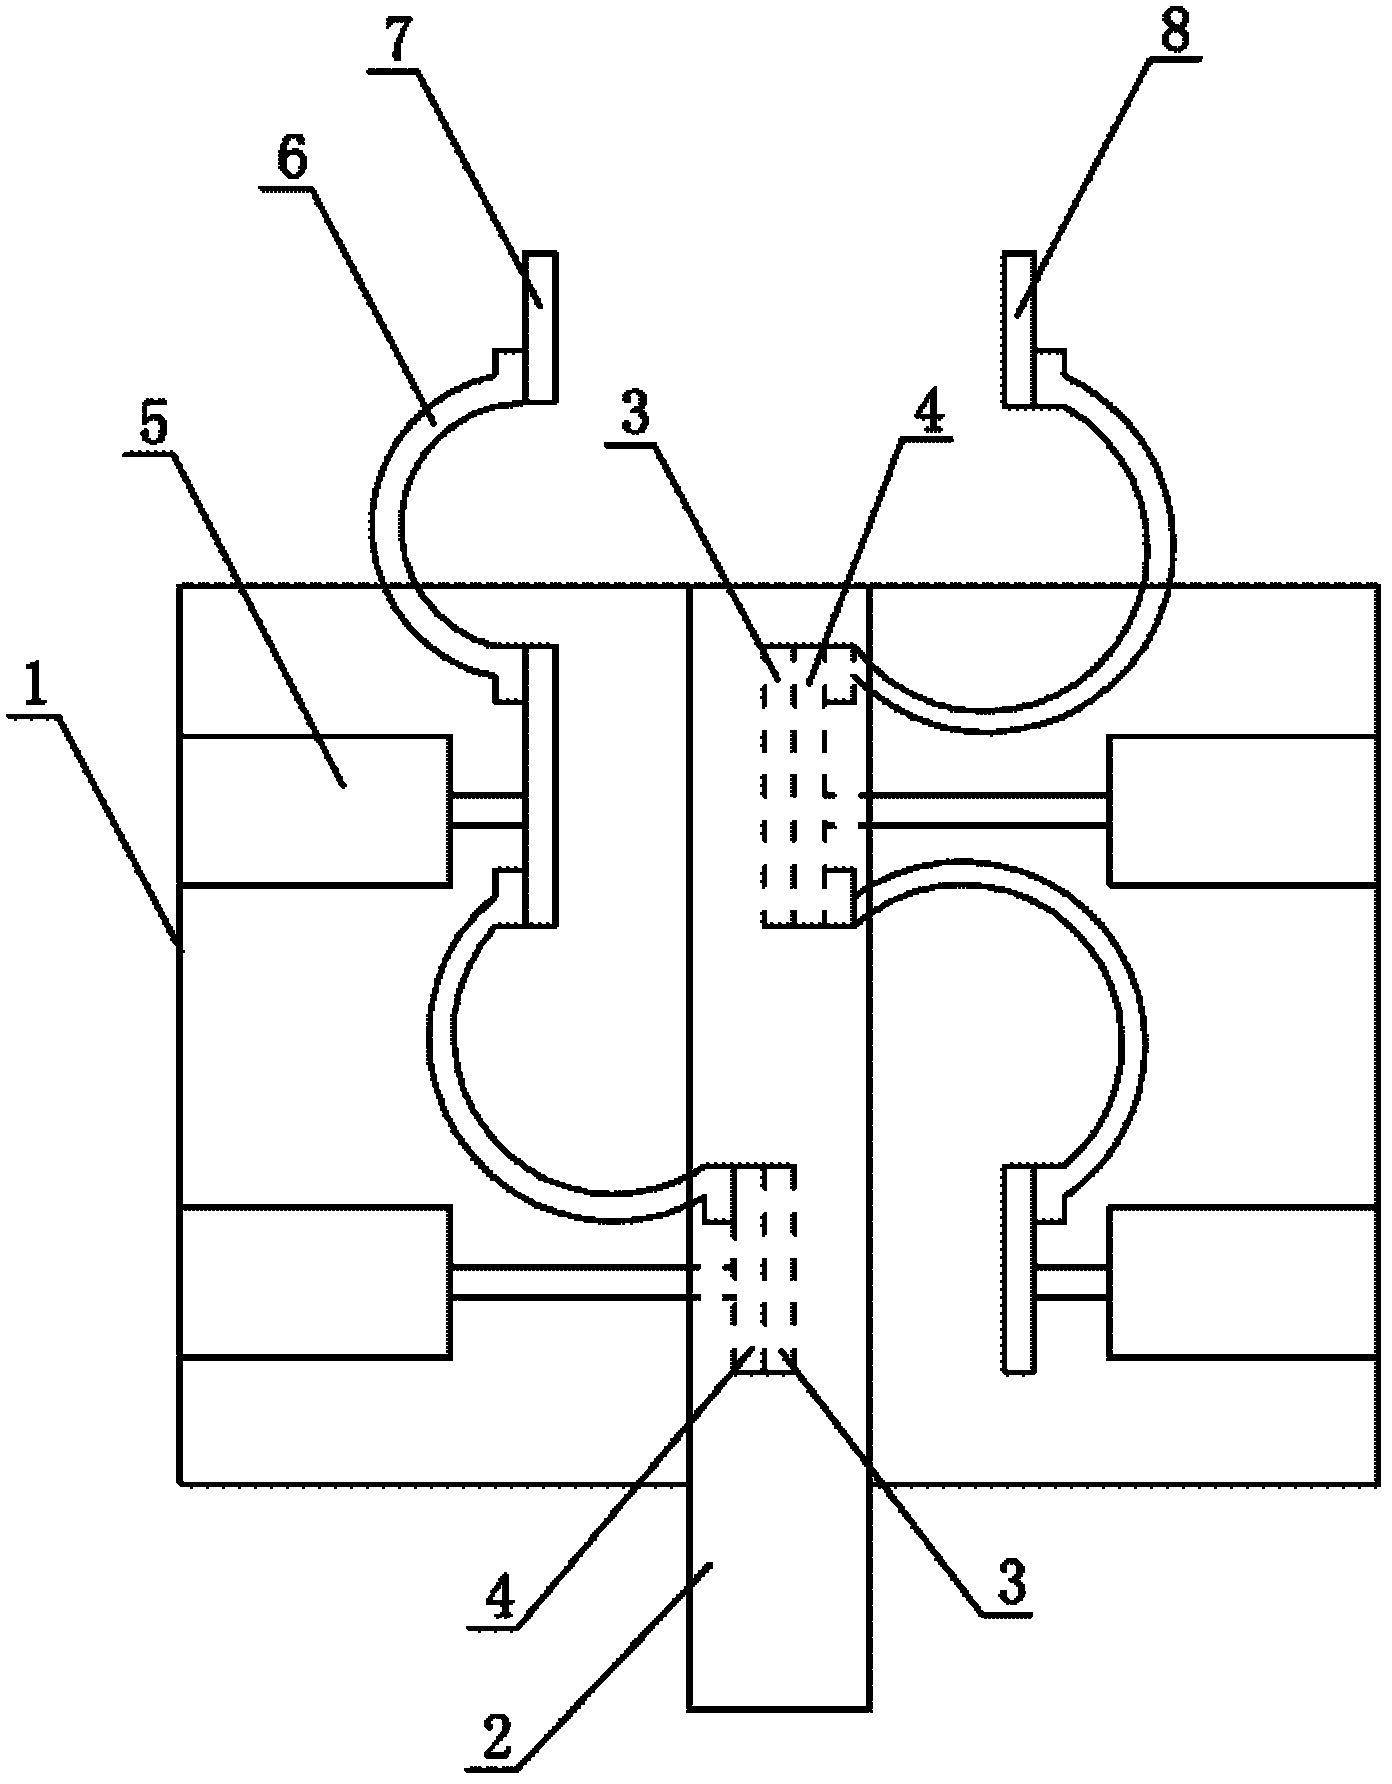 Converting device of positive and negative electrodes of rectifier